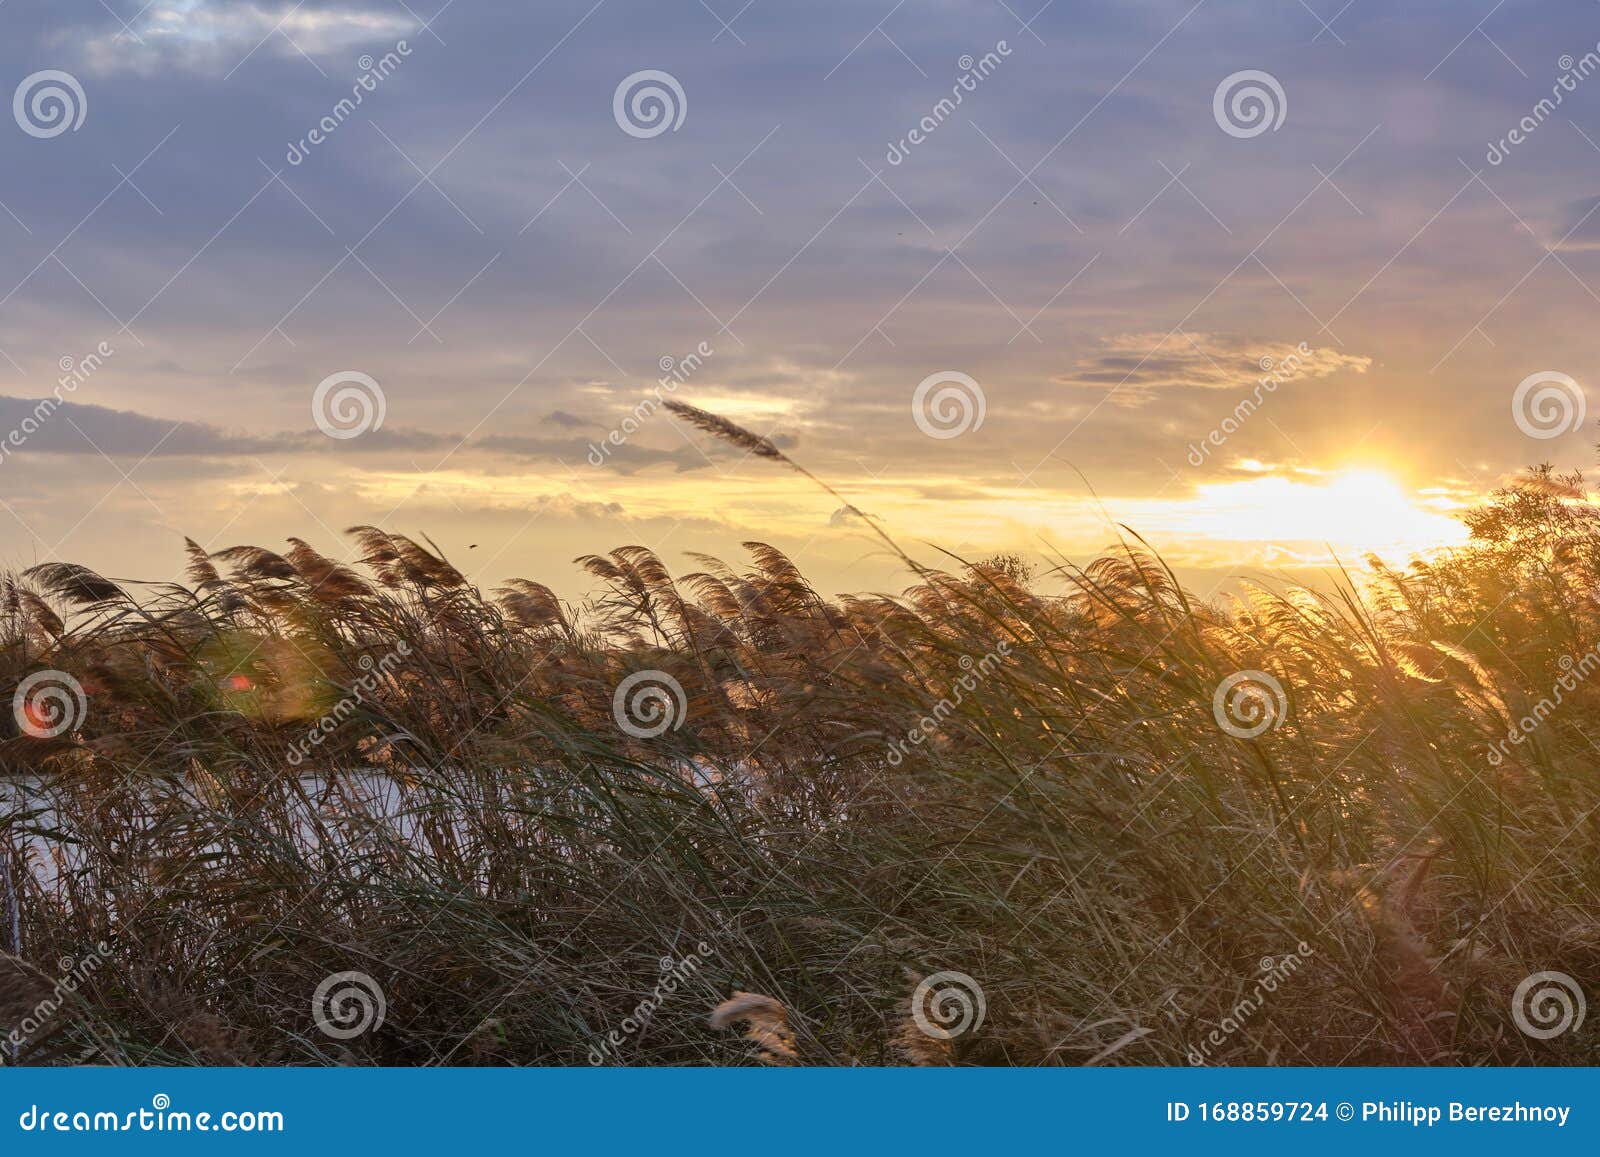 Sunset Landscape at Reed Grown River Bank Stock Photo - Image of bank ...